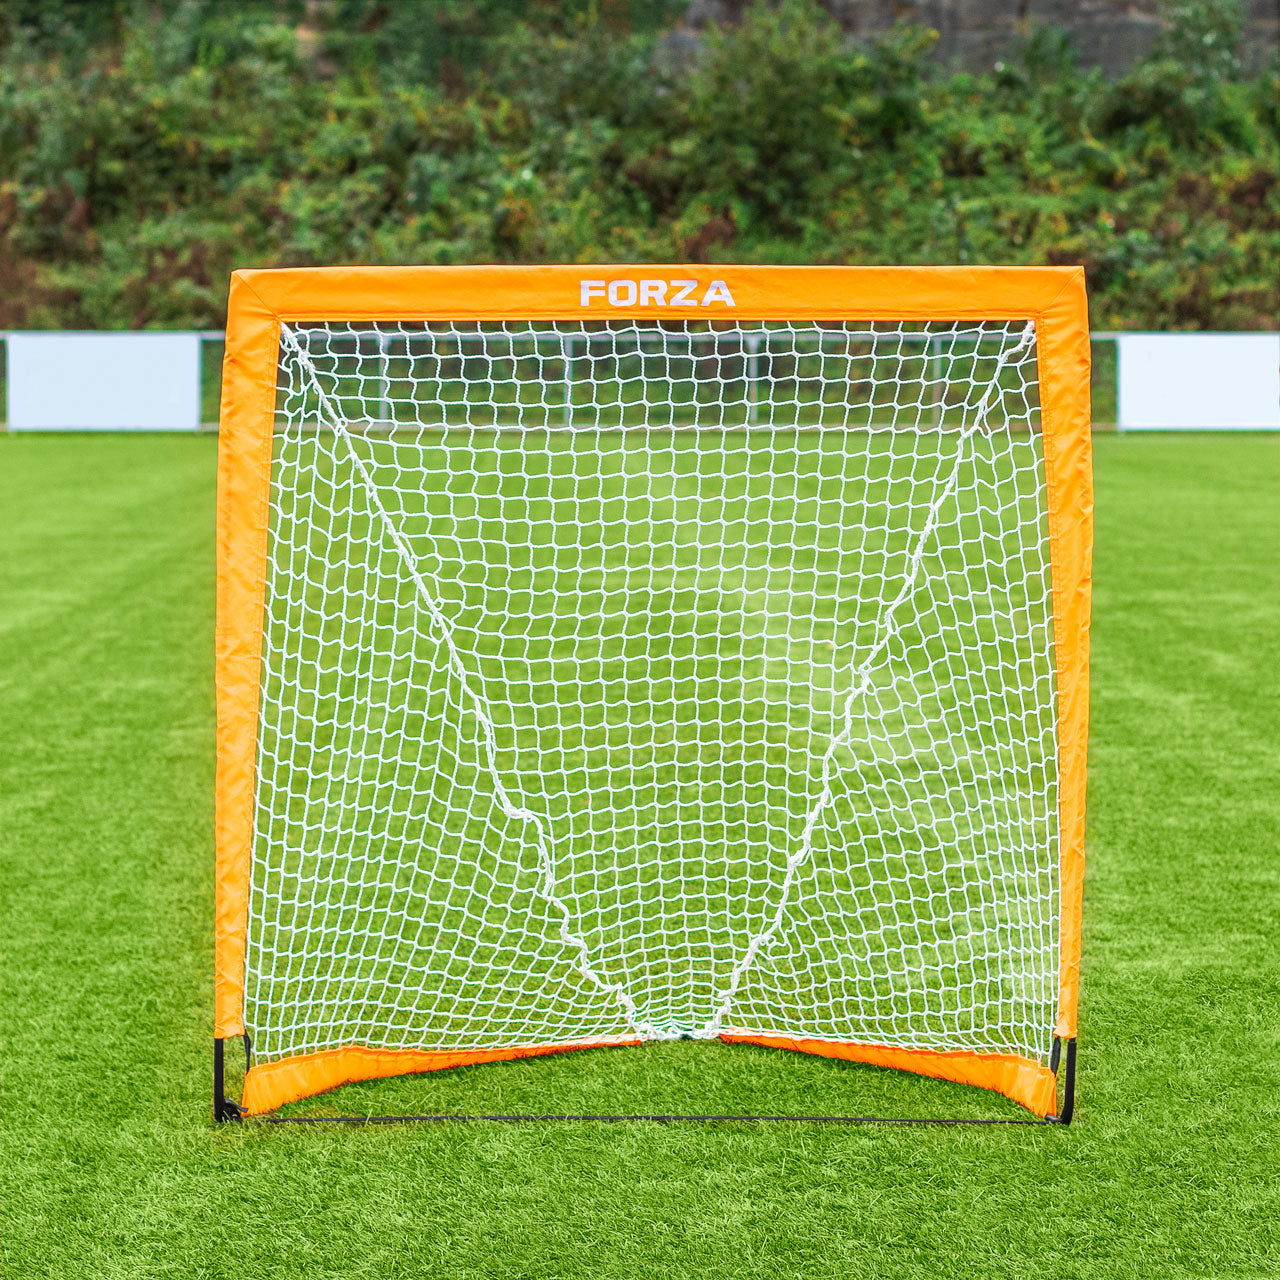 FORZA Pop-Up 4 x 4 Portable Training Goal - Similar to Bownet